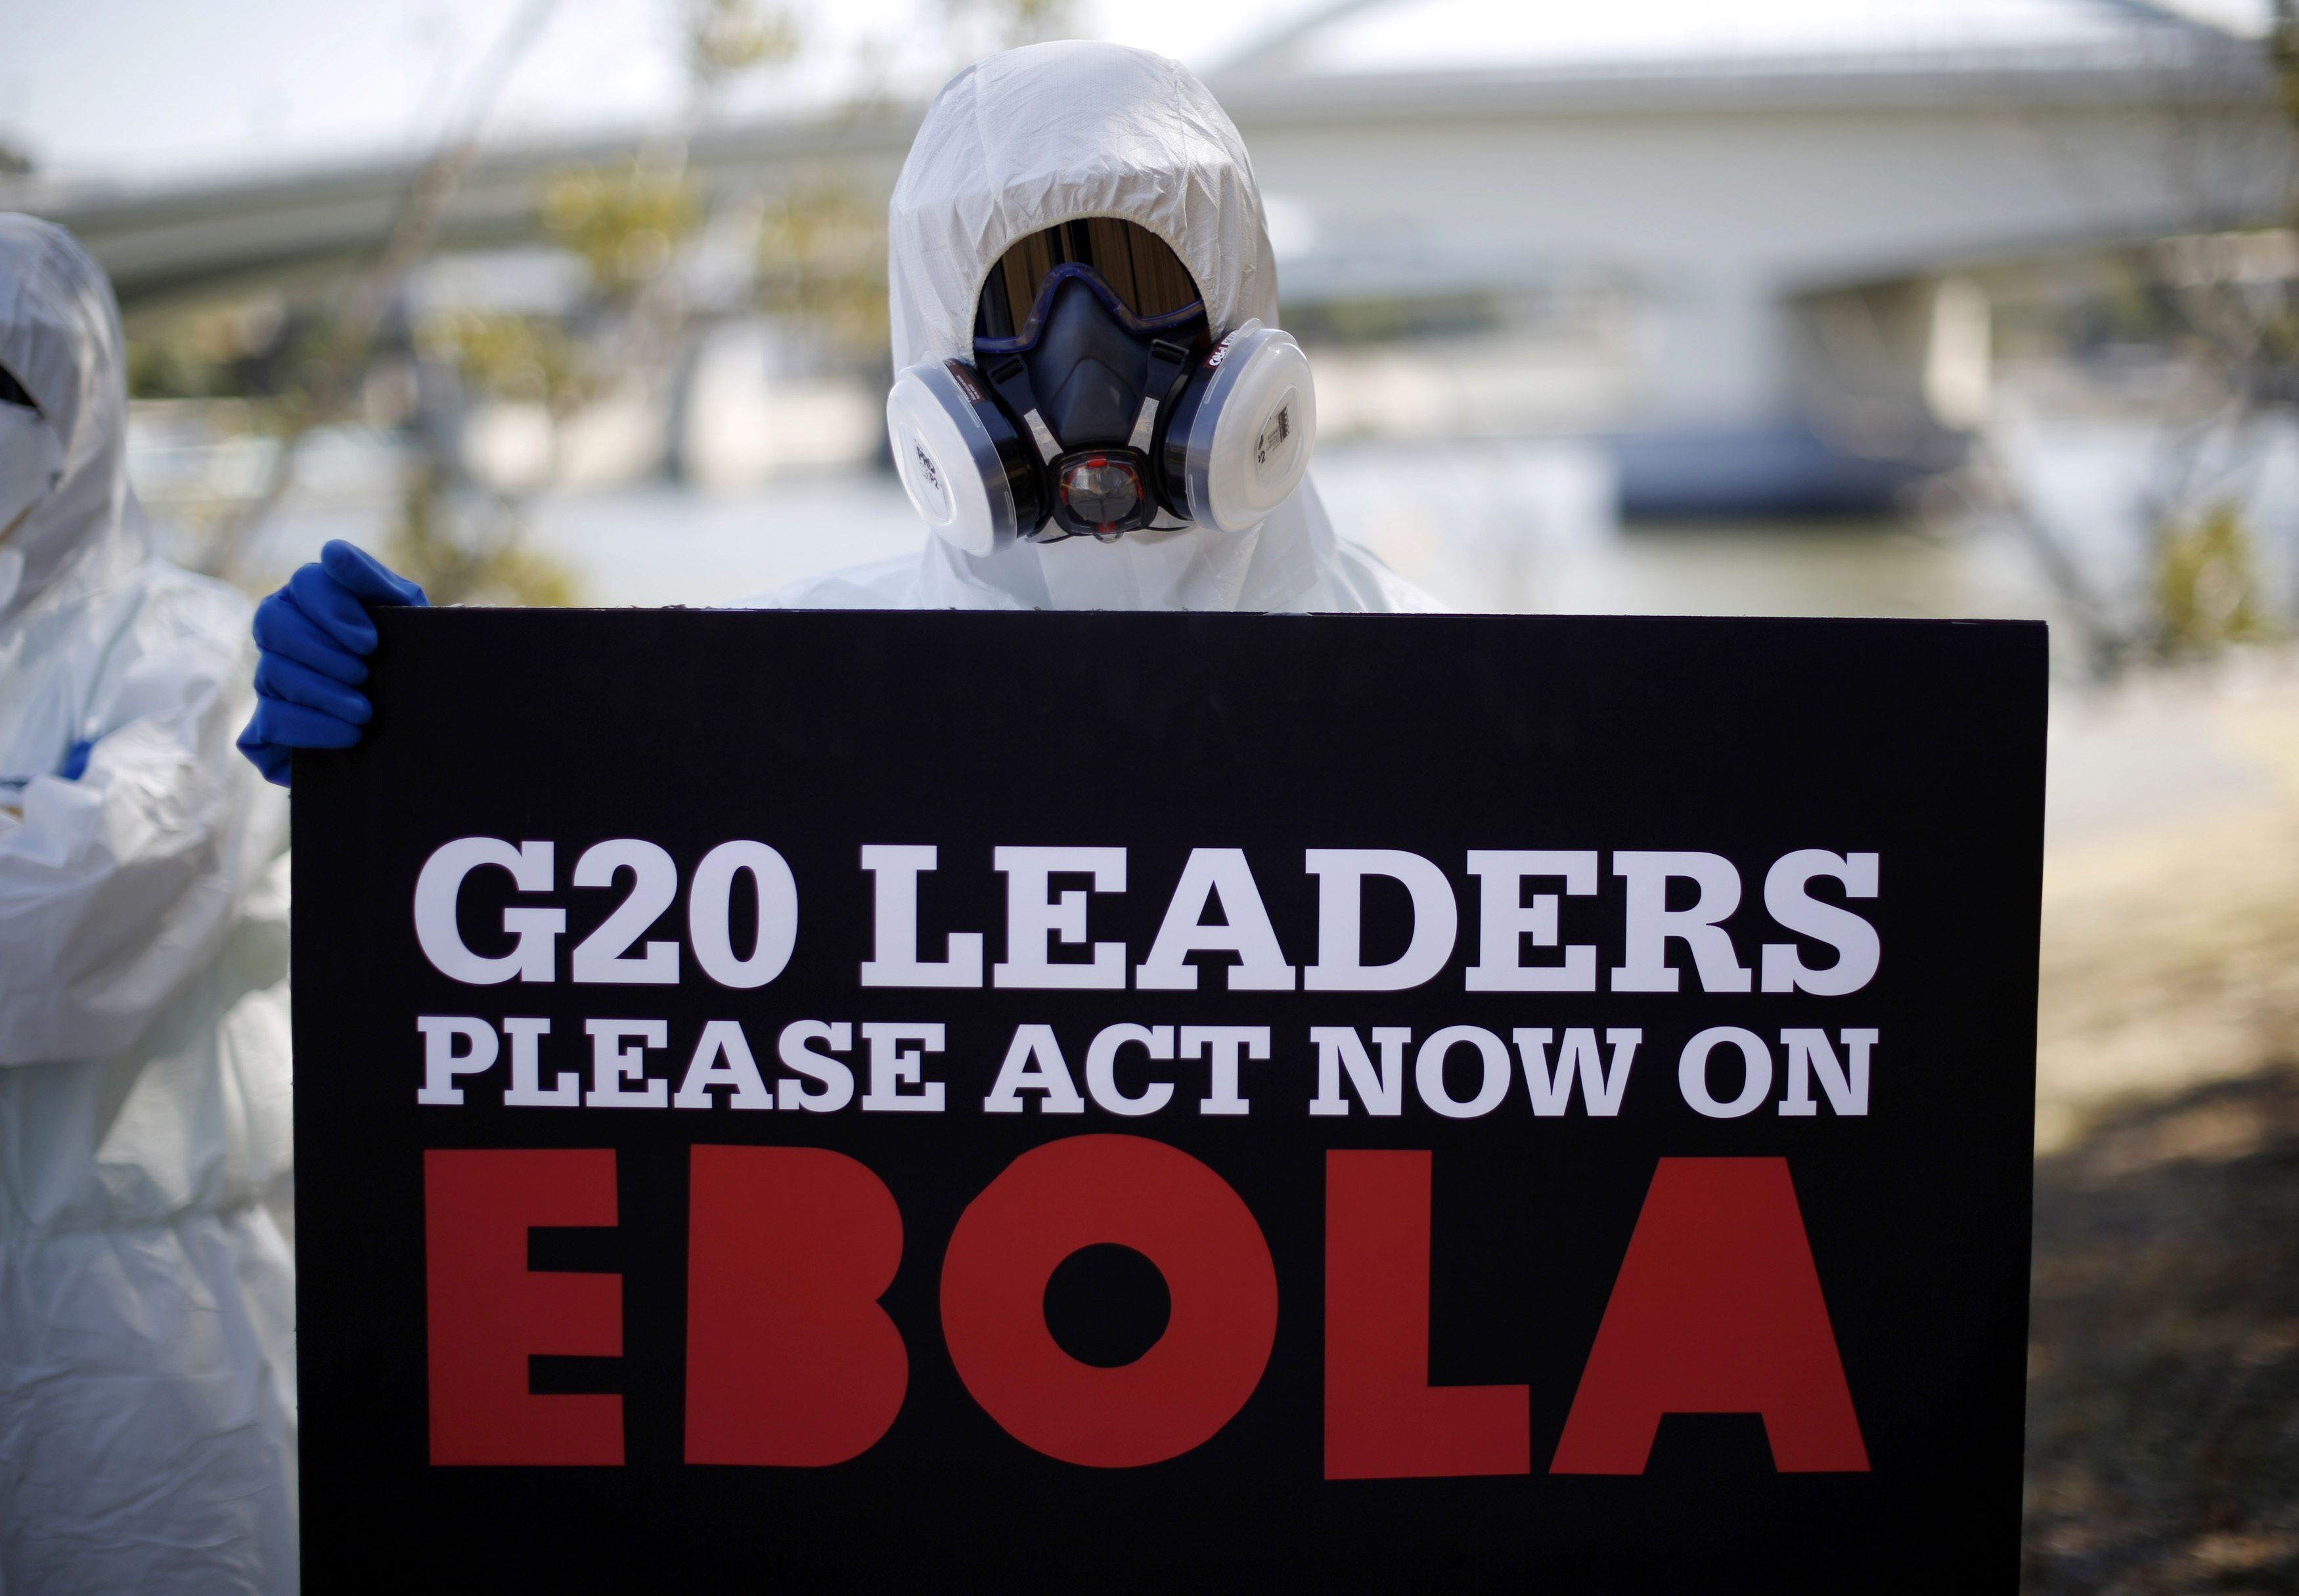 A protester dressed in protective equipment demonstrates, calling for for G20 leaders to address the Ebola issue, near the G20 leaders summit venue in Brisbane Nov. 15, 2014 (Jason Reed—Reuters)